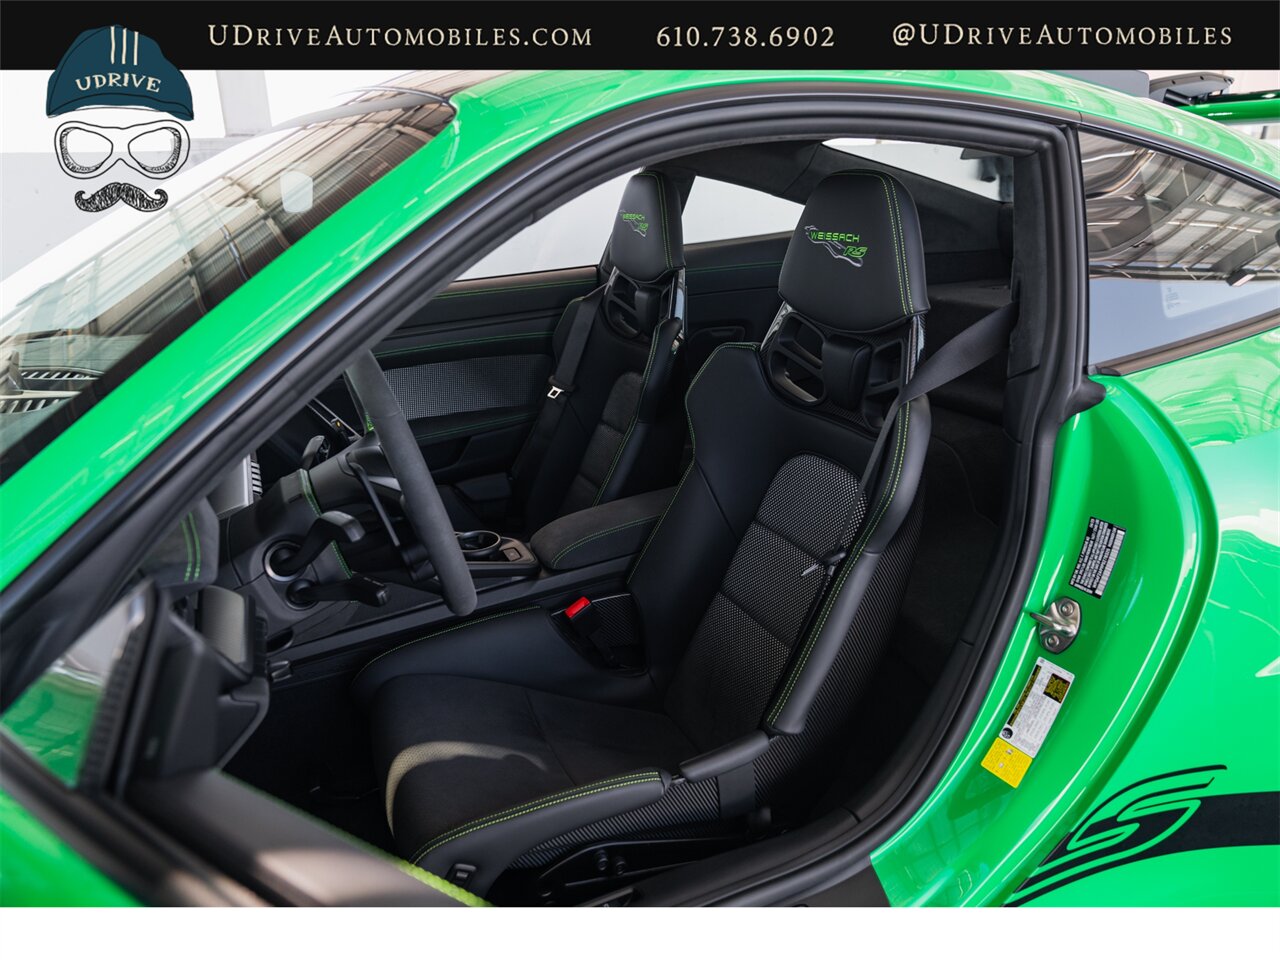 2023 Porsche 911 GT3 RS  Weissach Pkg FAL Full Body PPF $43k in Extras - Photo 6 - West Chester, PA 19382